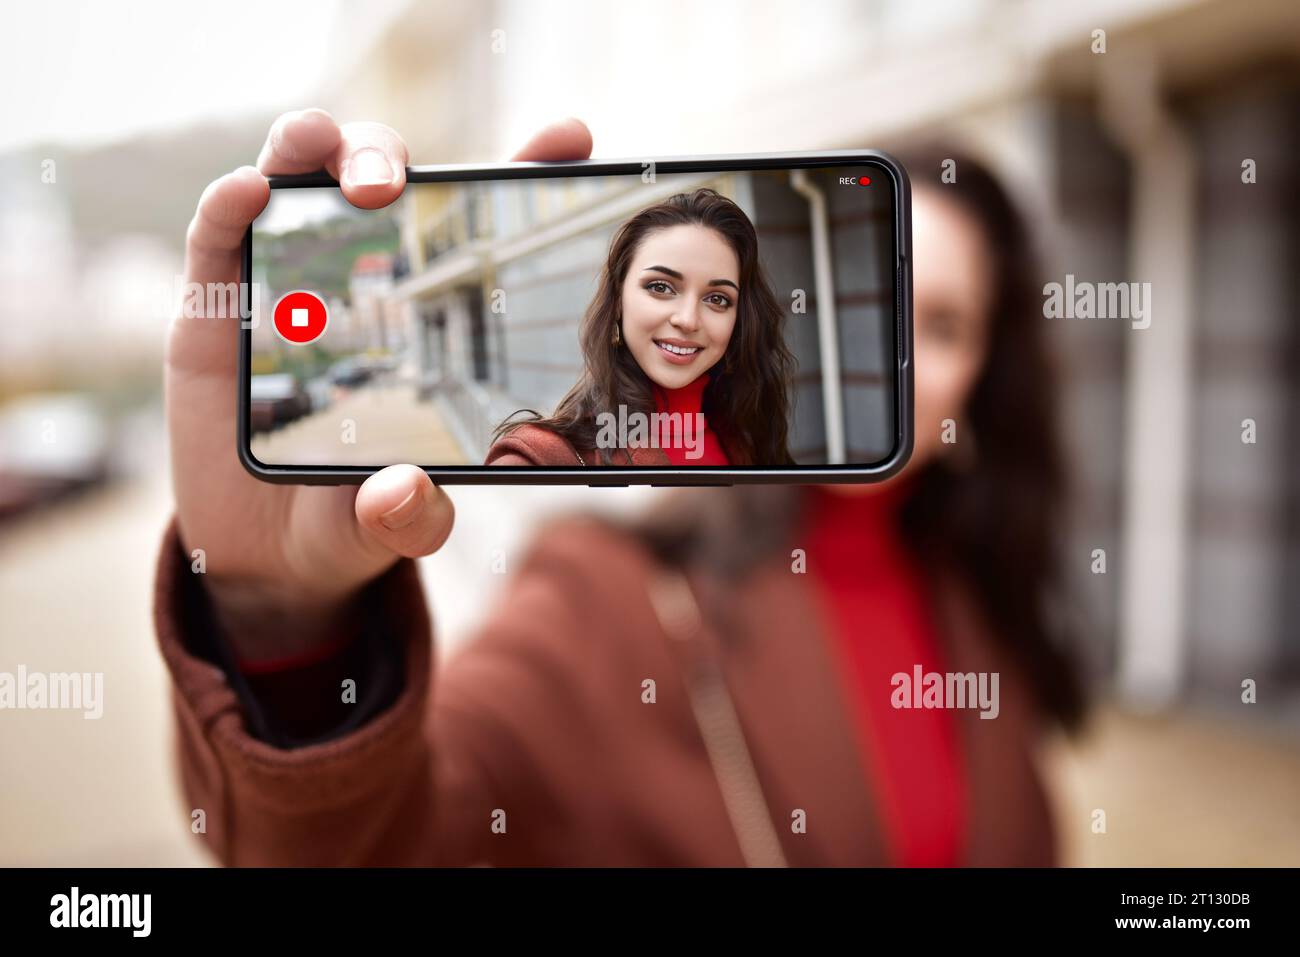 A young woman on the street is video blogging on her phone, her image visible on the phone's screen. Stock Photo